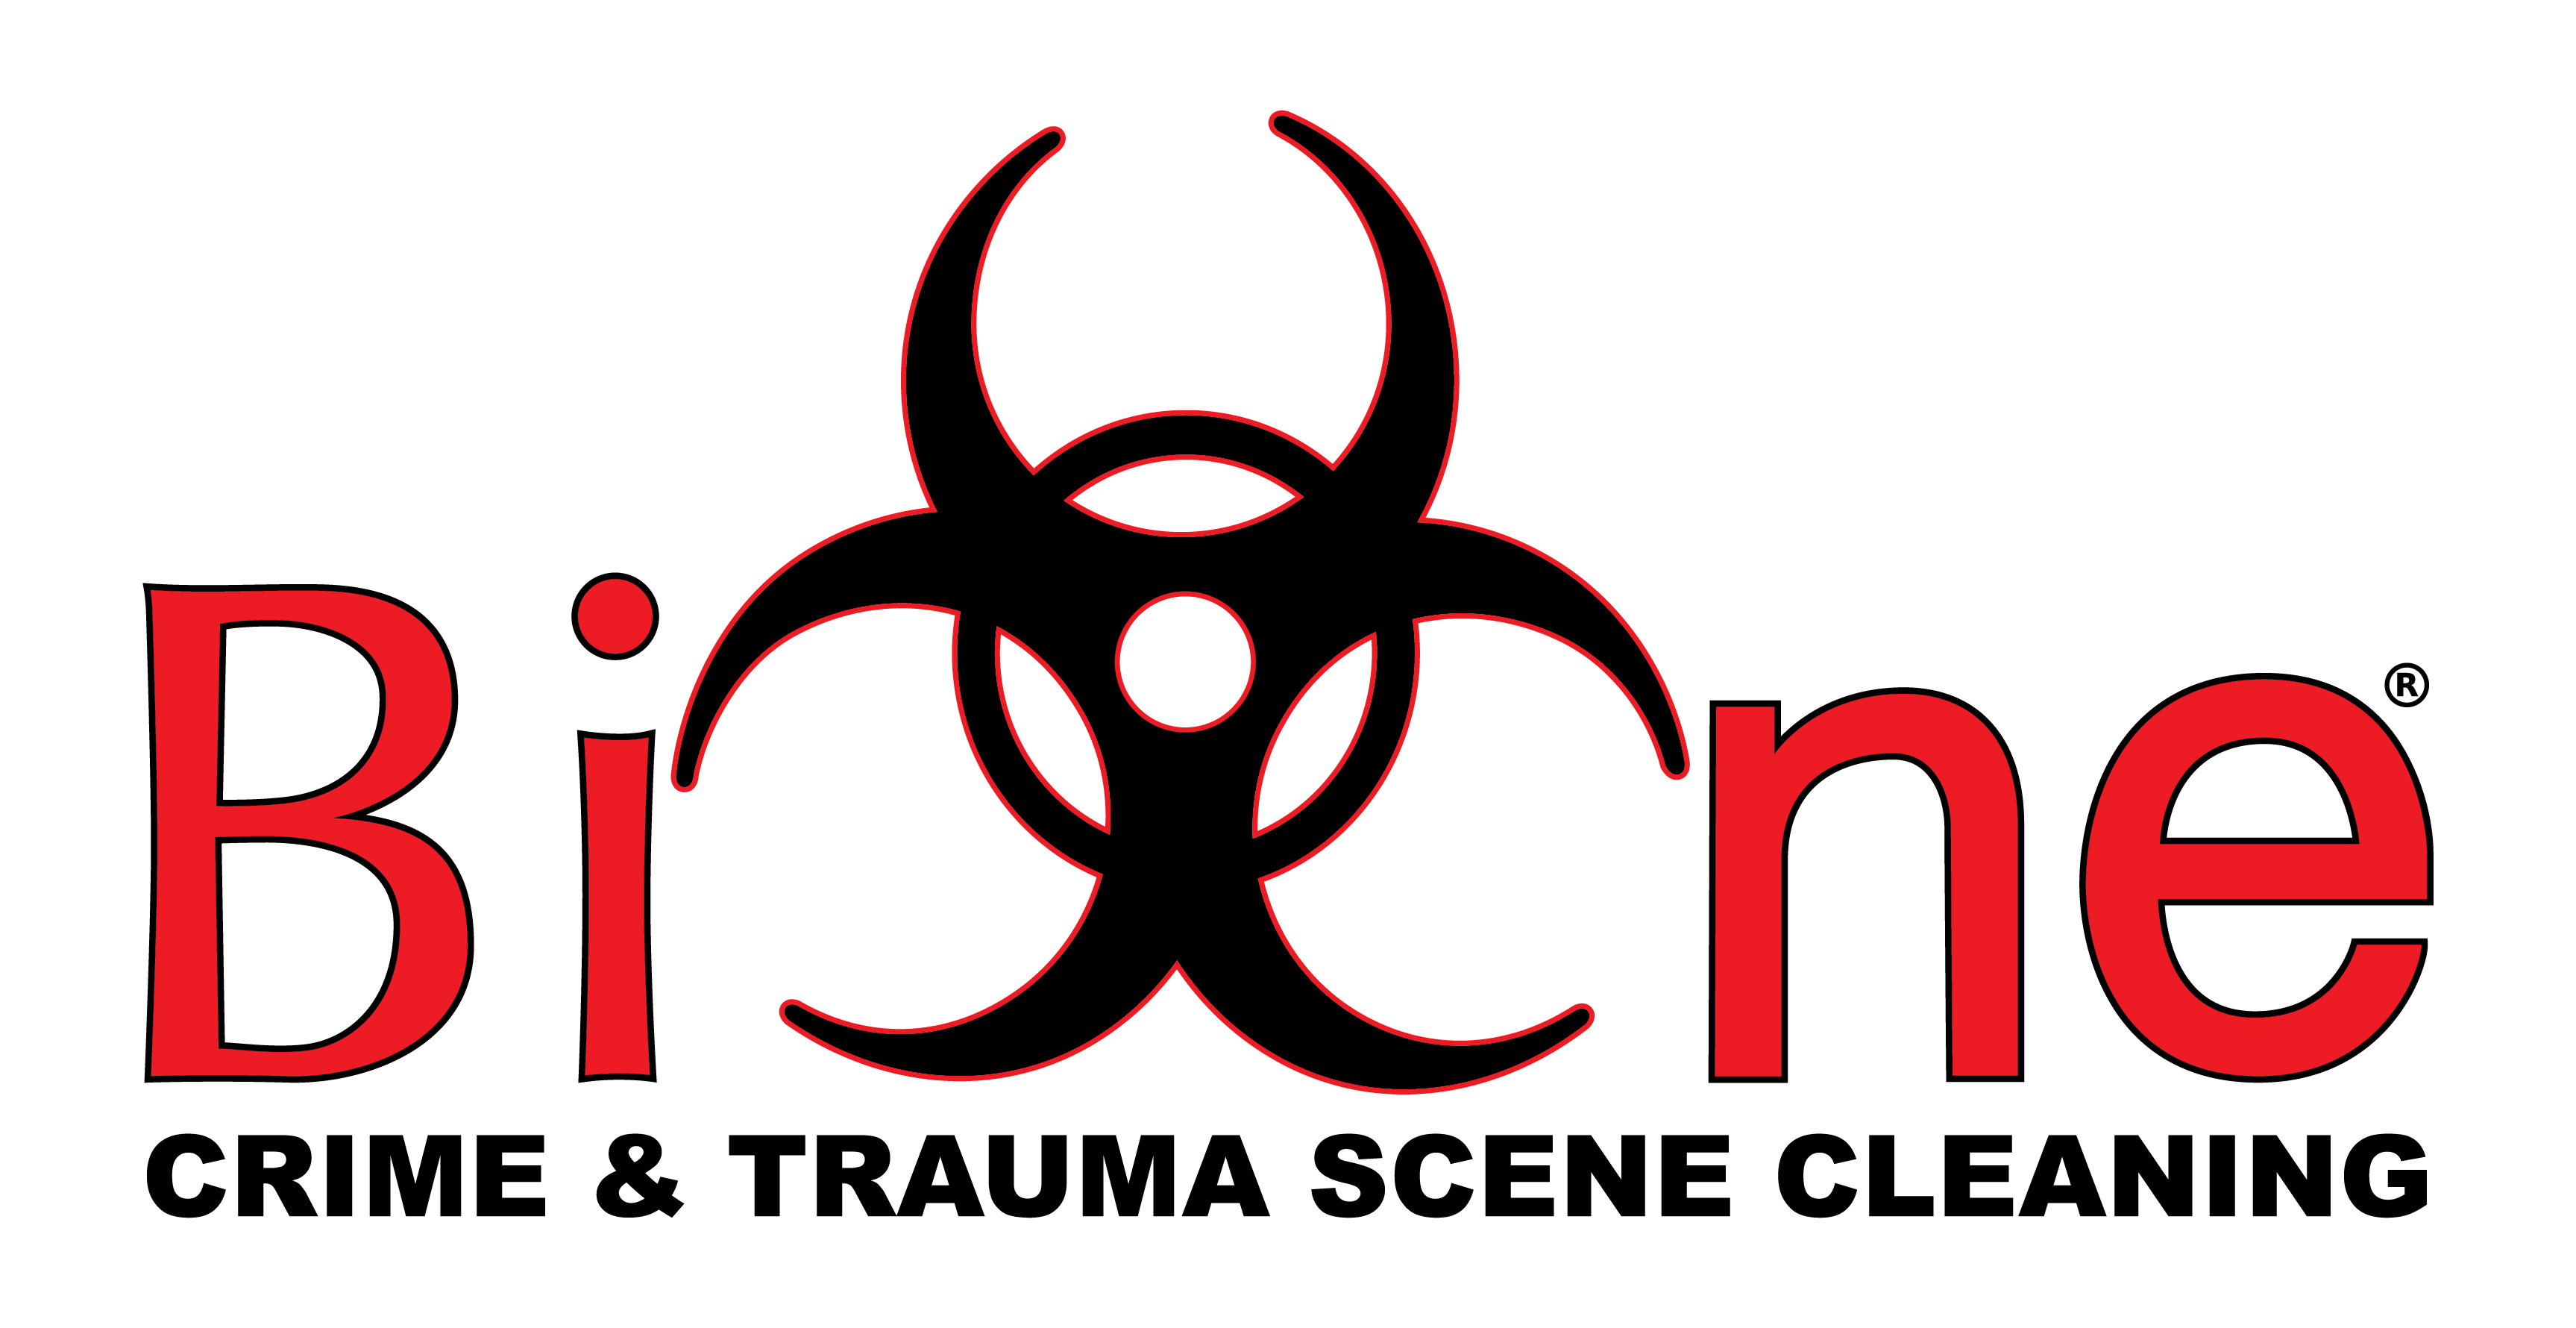 Red and black text logo with biohazard symbol